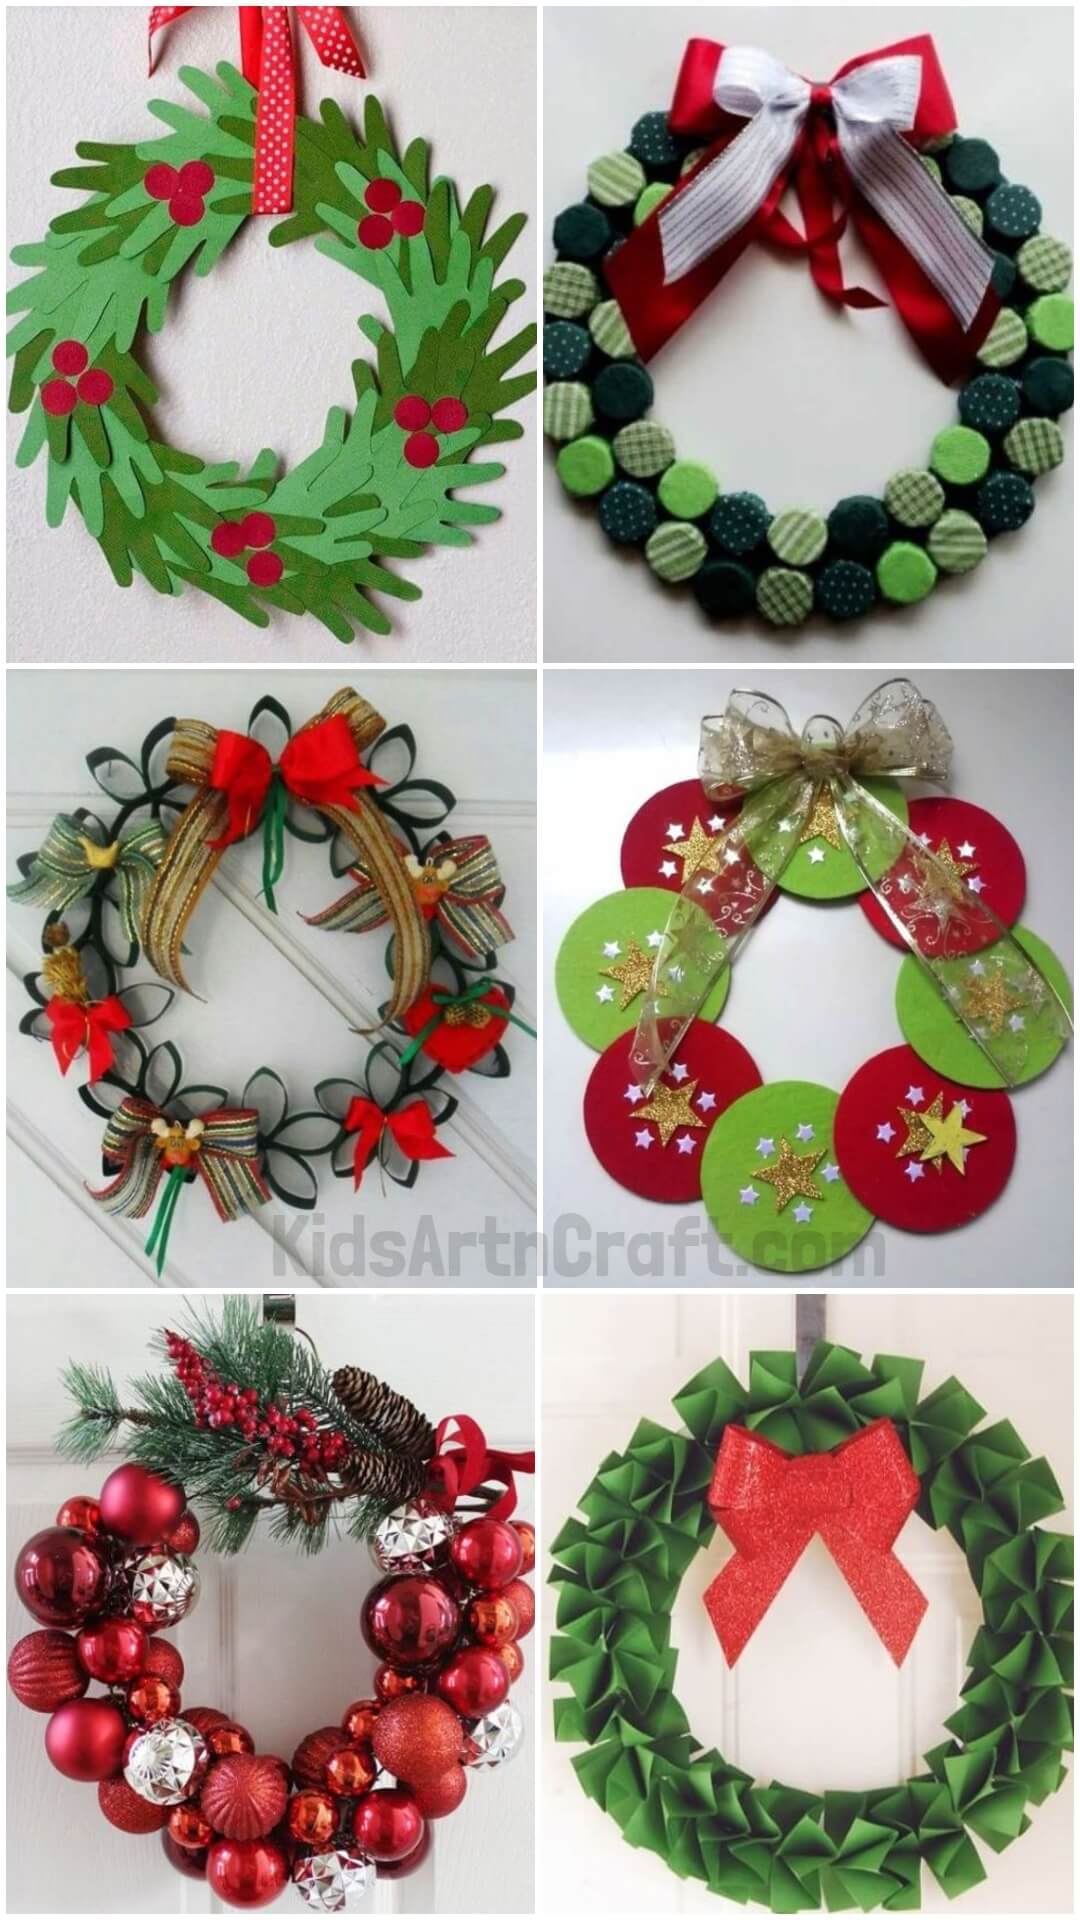 Easy Christmas Wreath Ideas for Kids to Make with Parents